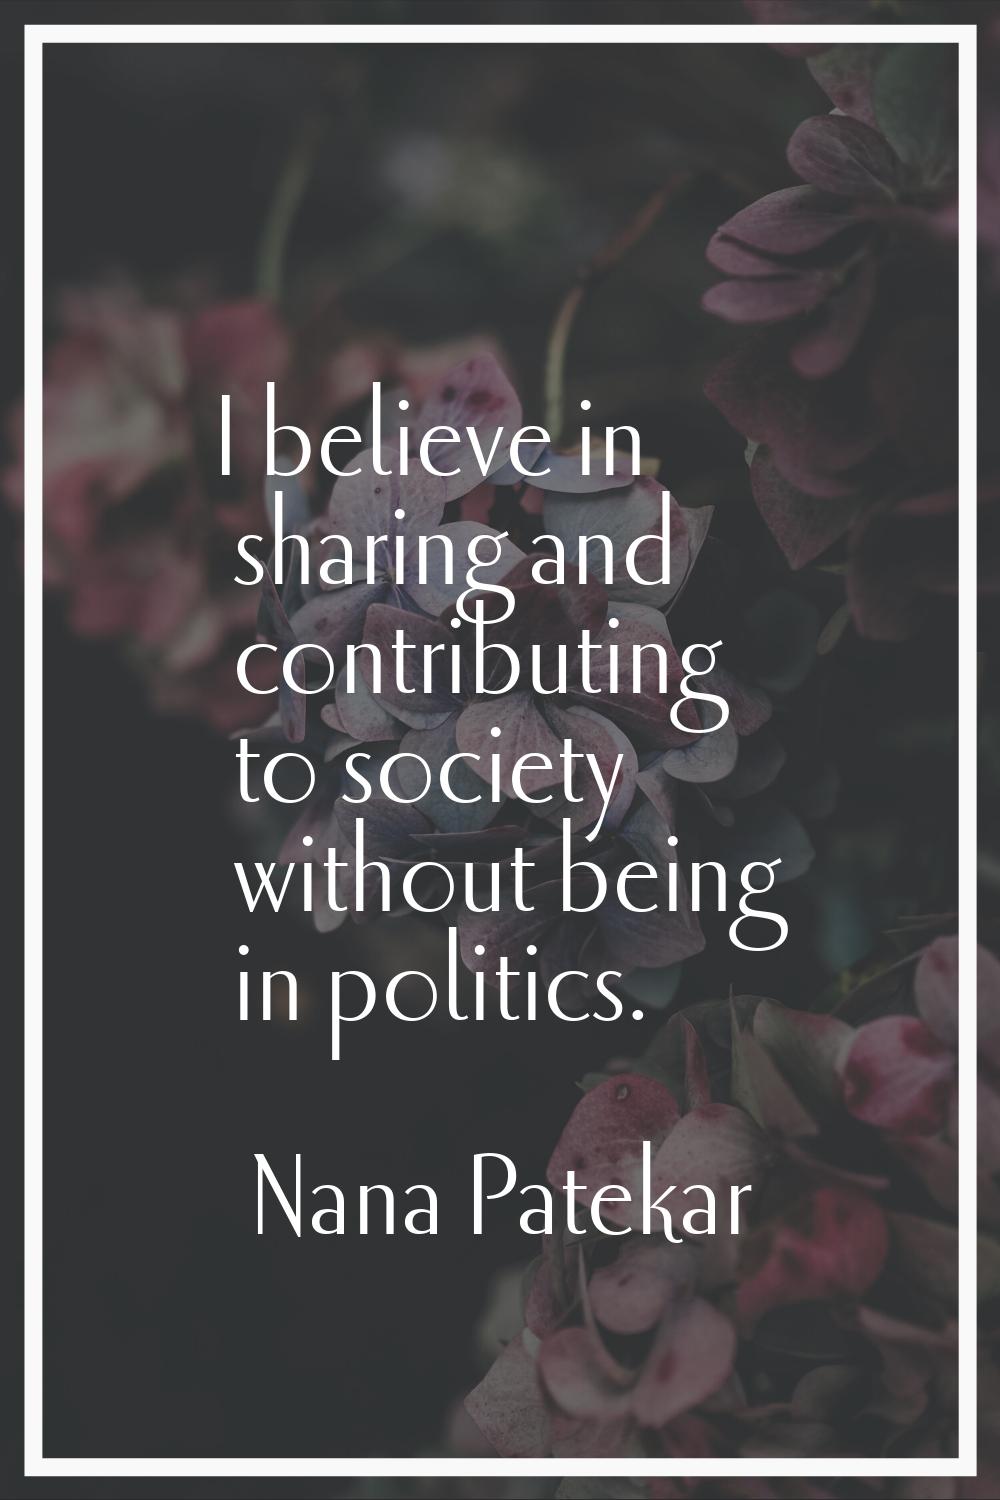 I believe in sharing and contributing to society without being in politics.